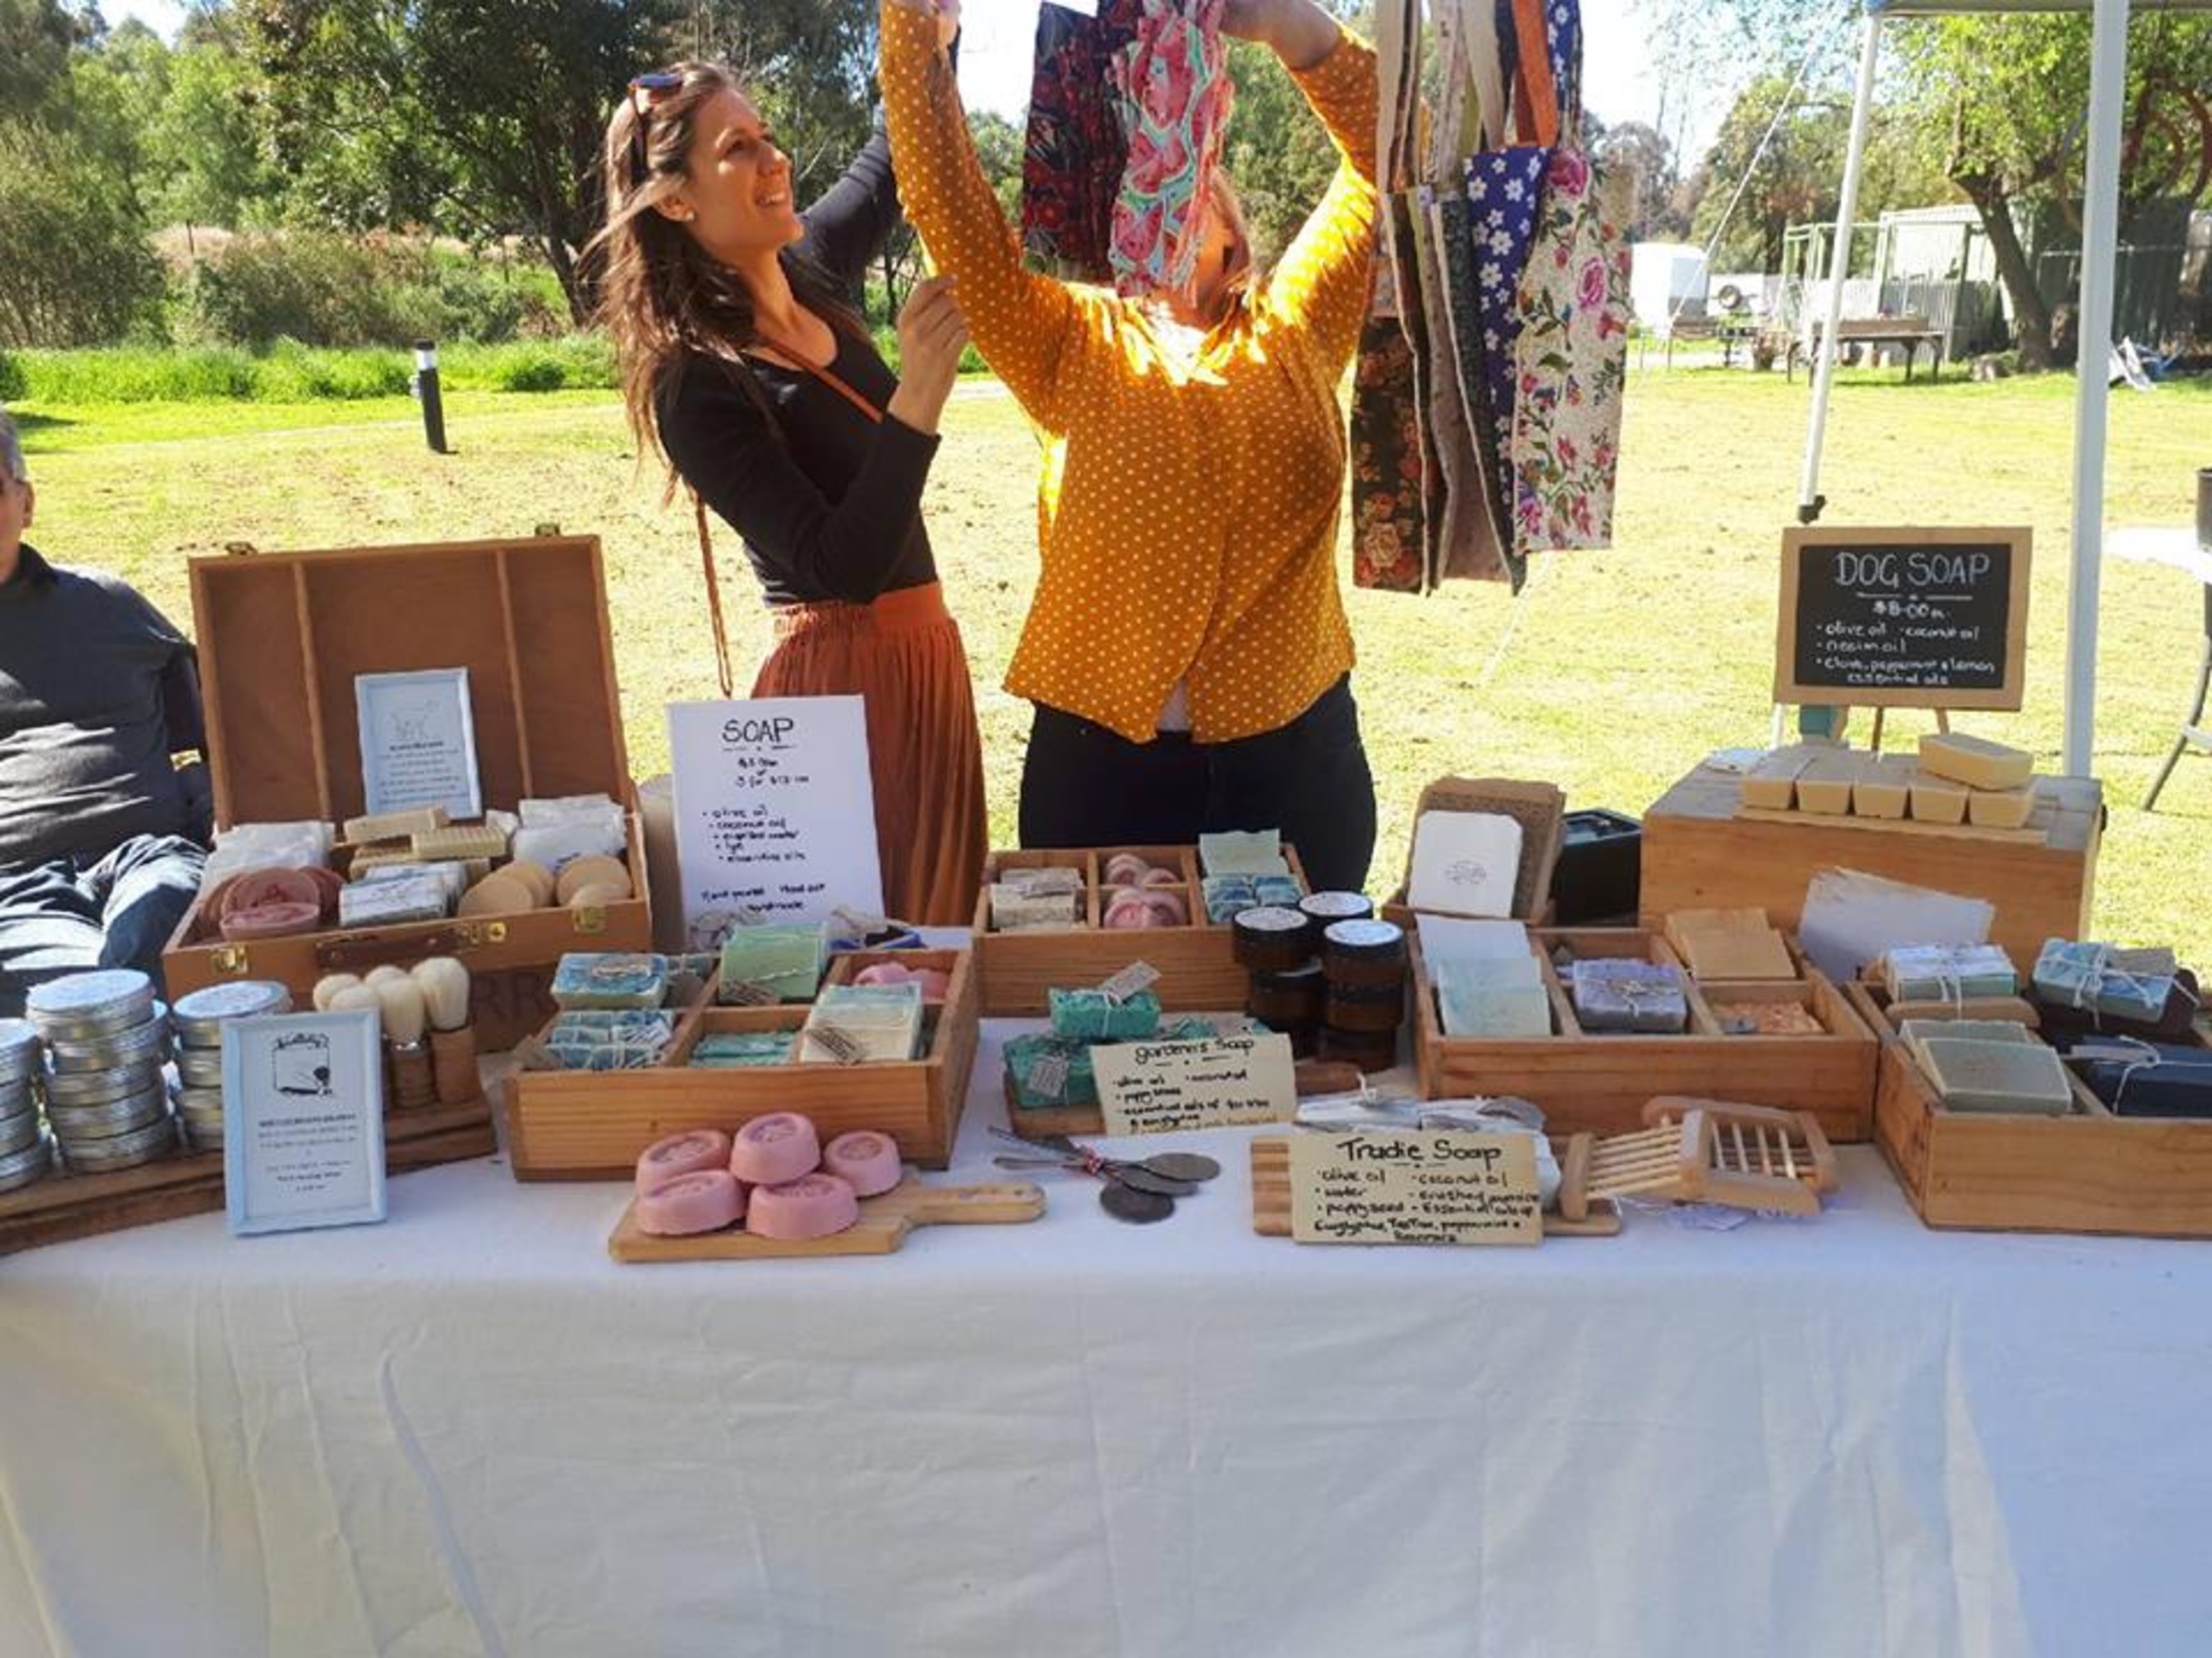 Locally made products at Peppergreen Farm Community Market